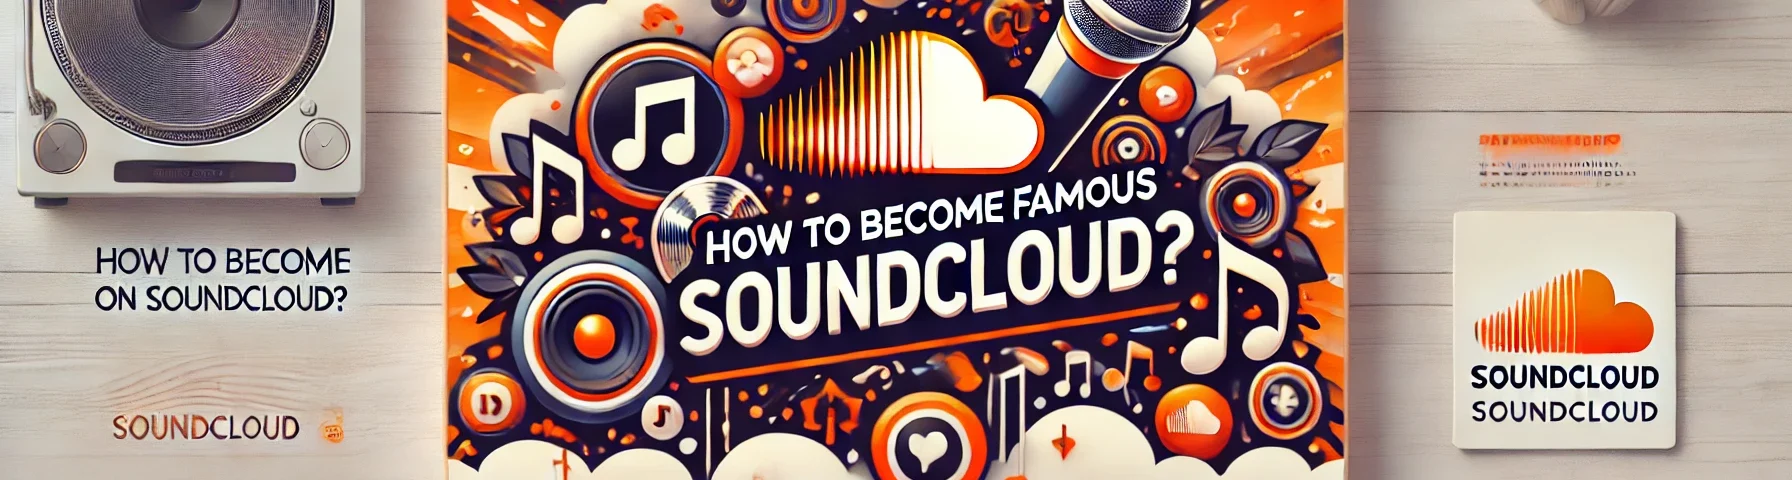 How to Become Famous on SoundCloud